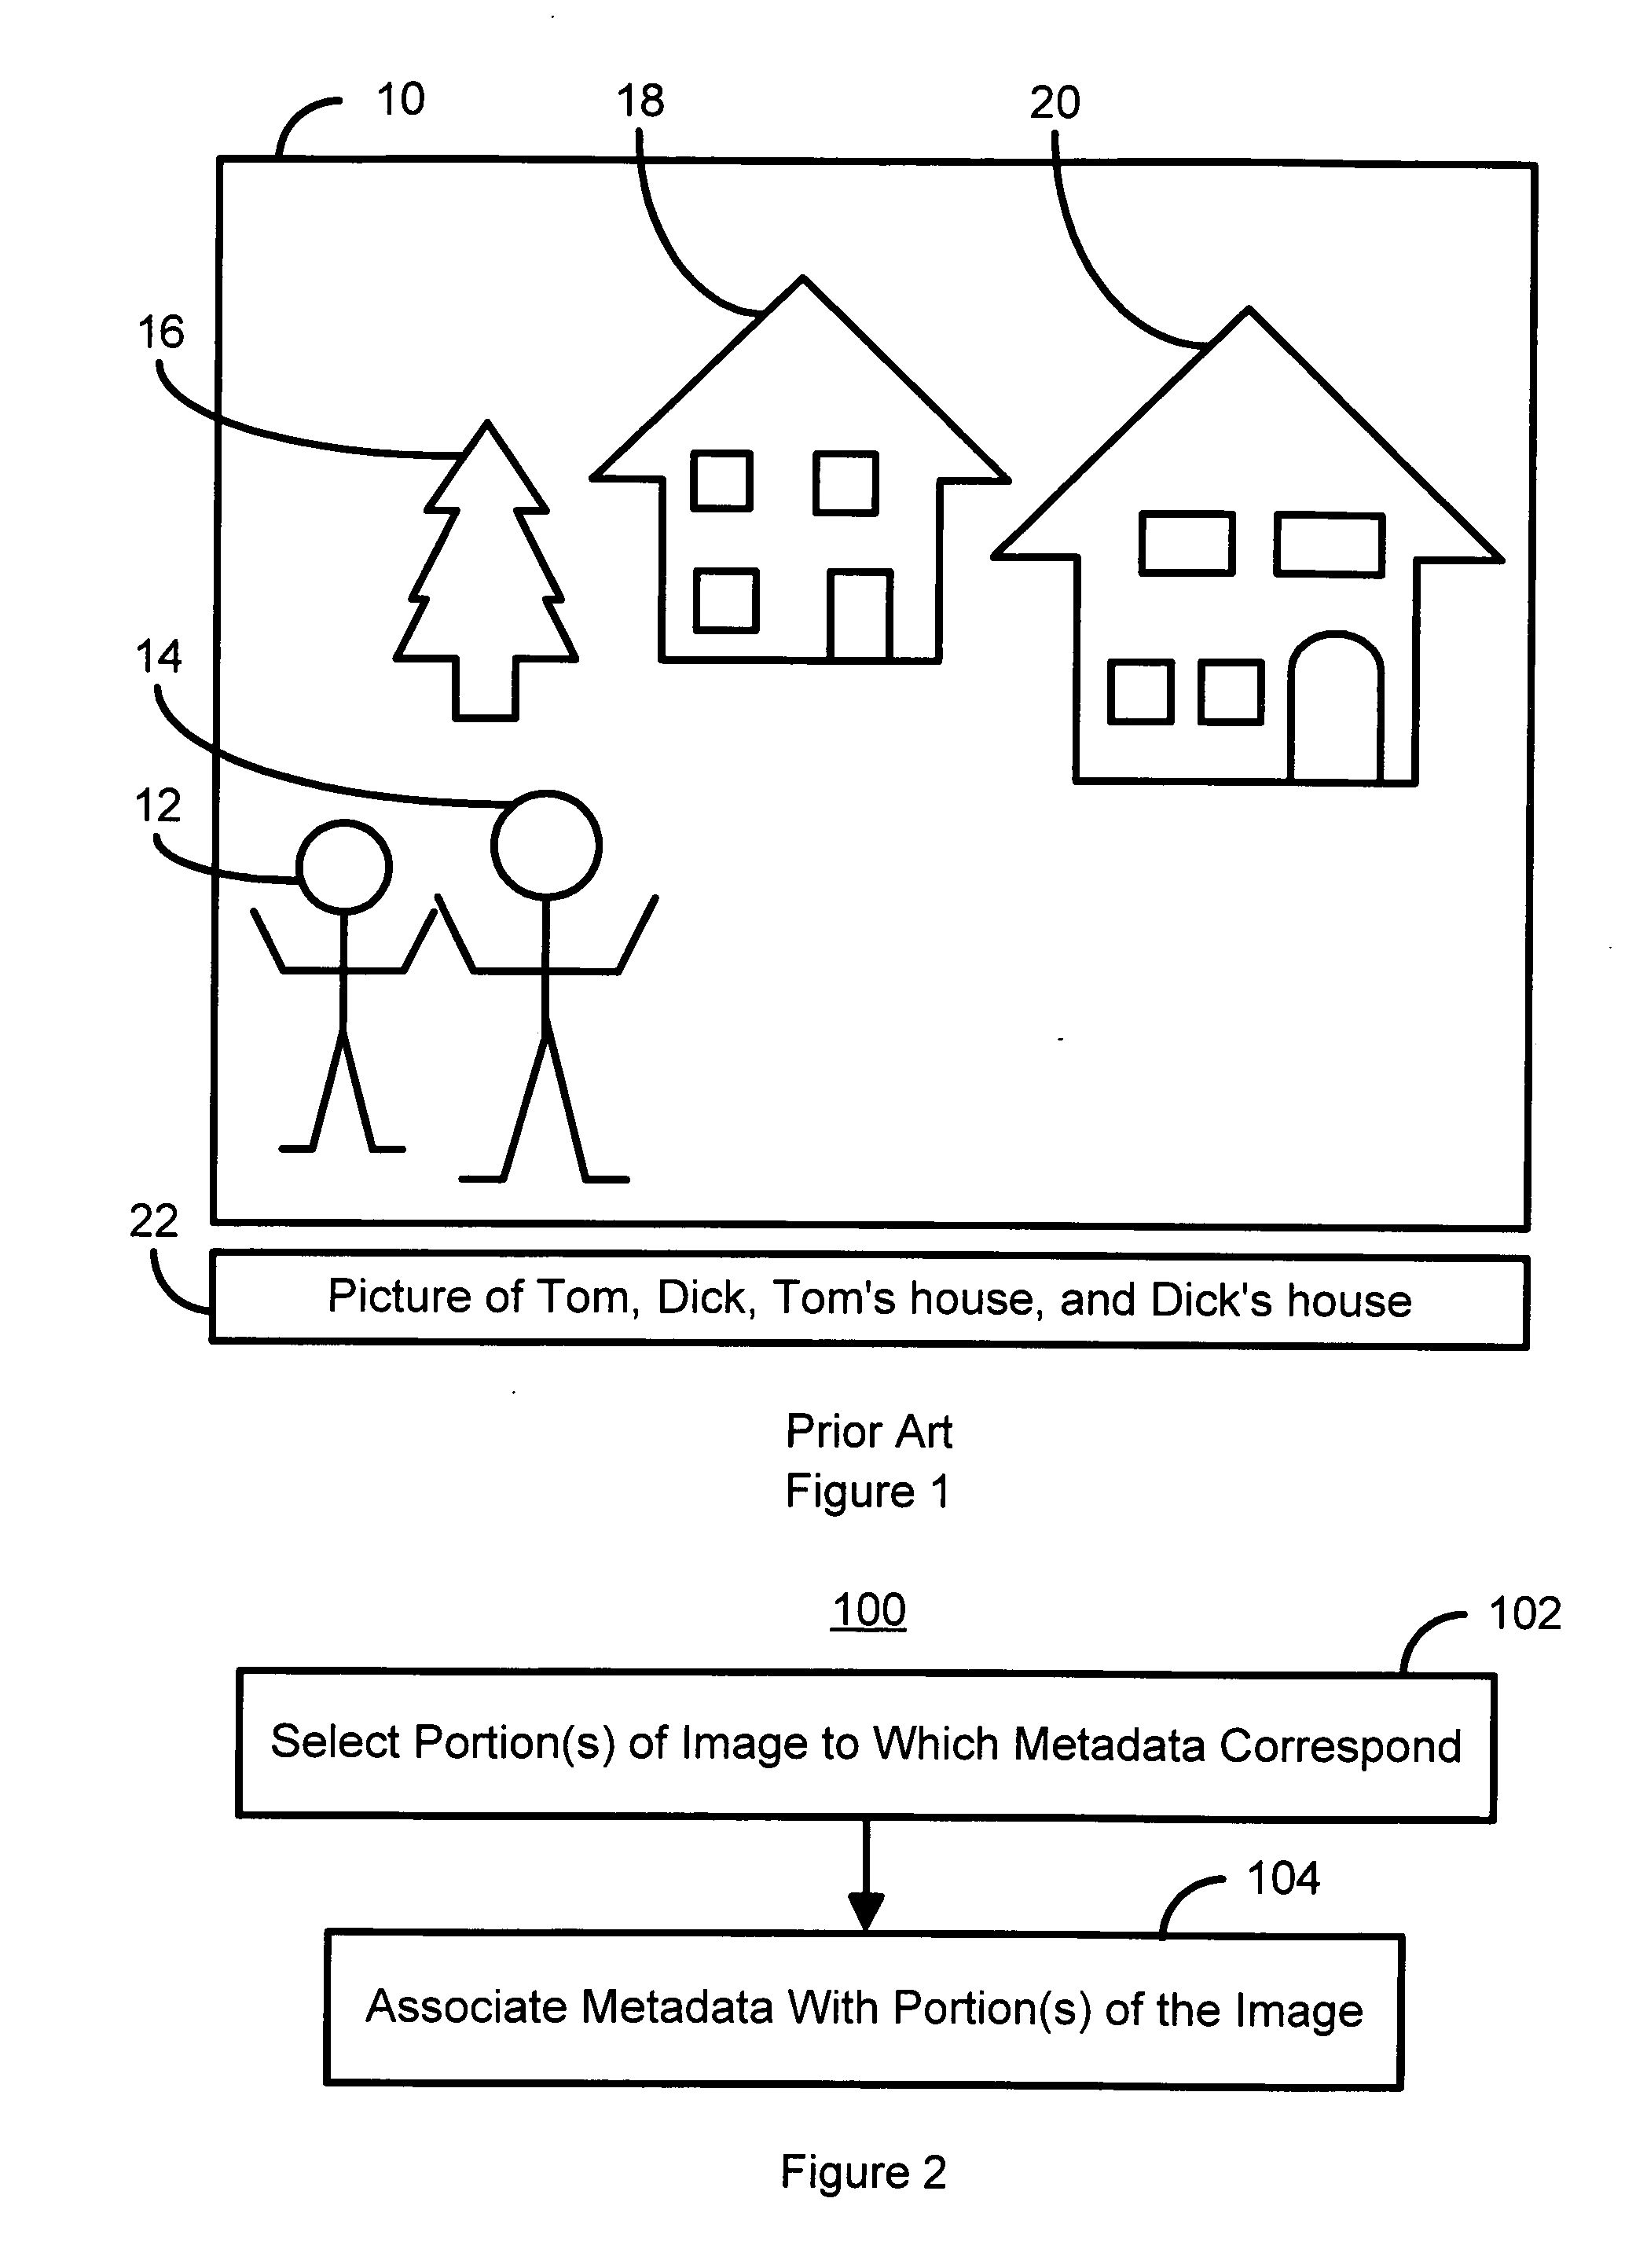 Method and system for more precisely linking metadata and digital images